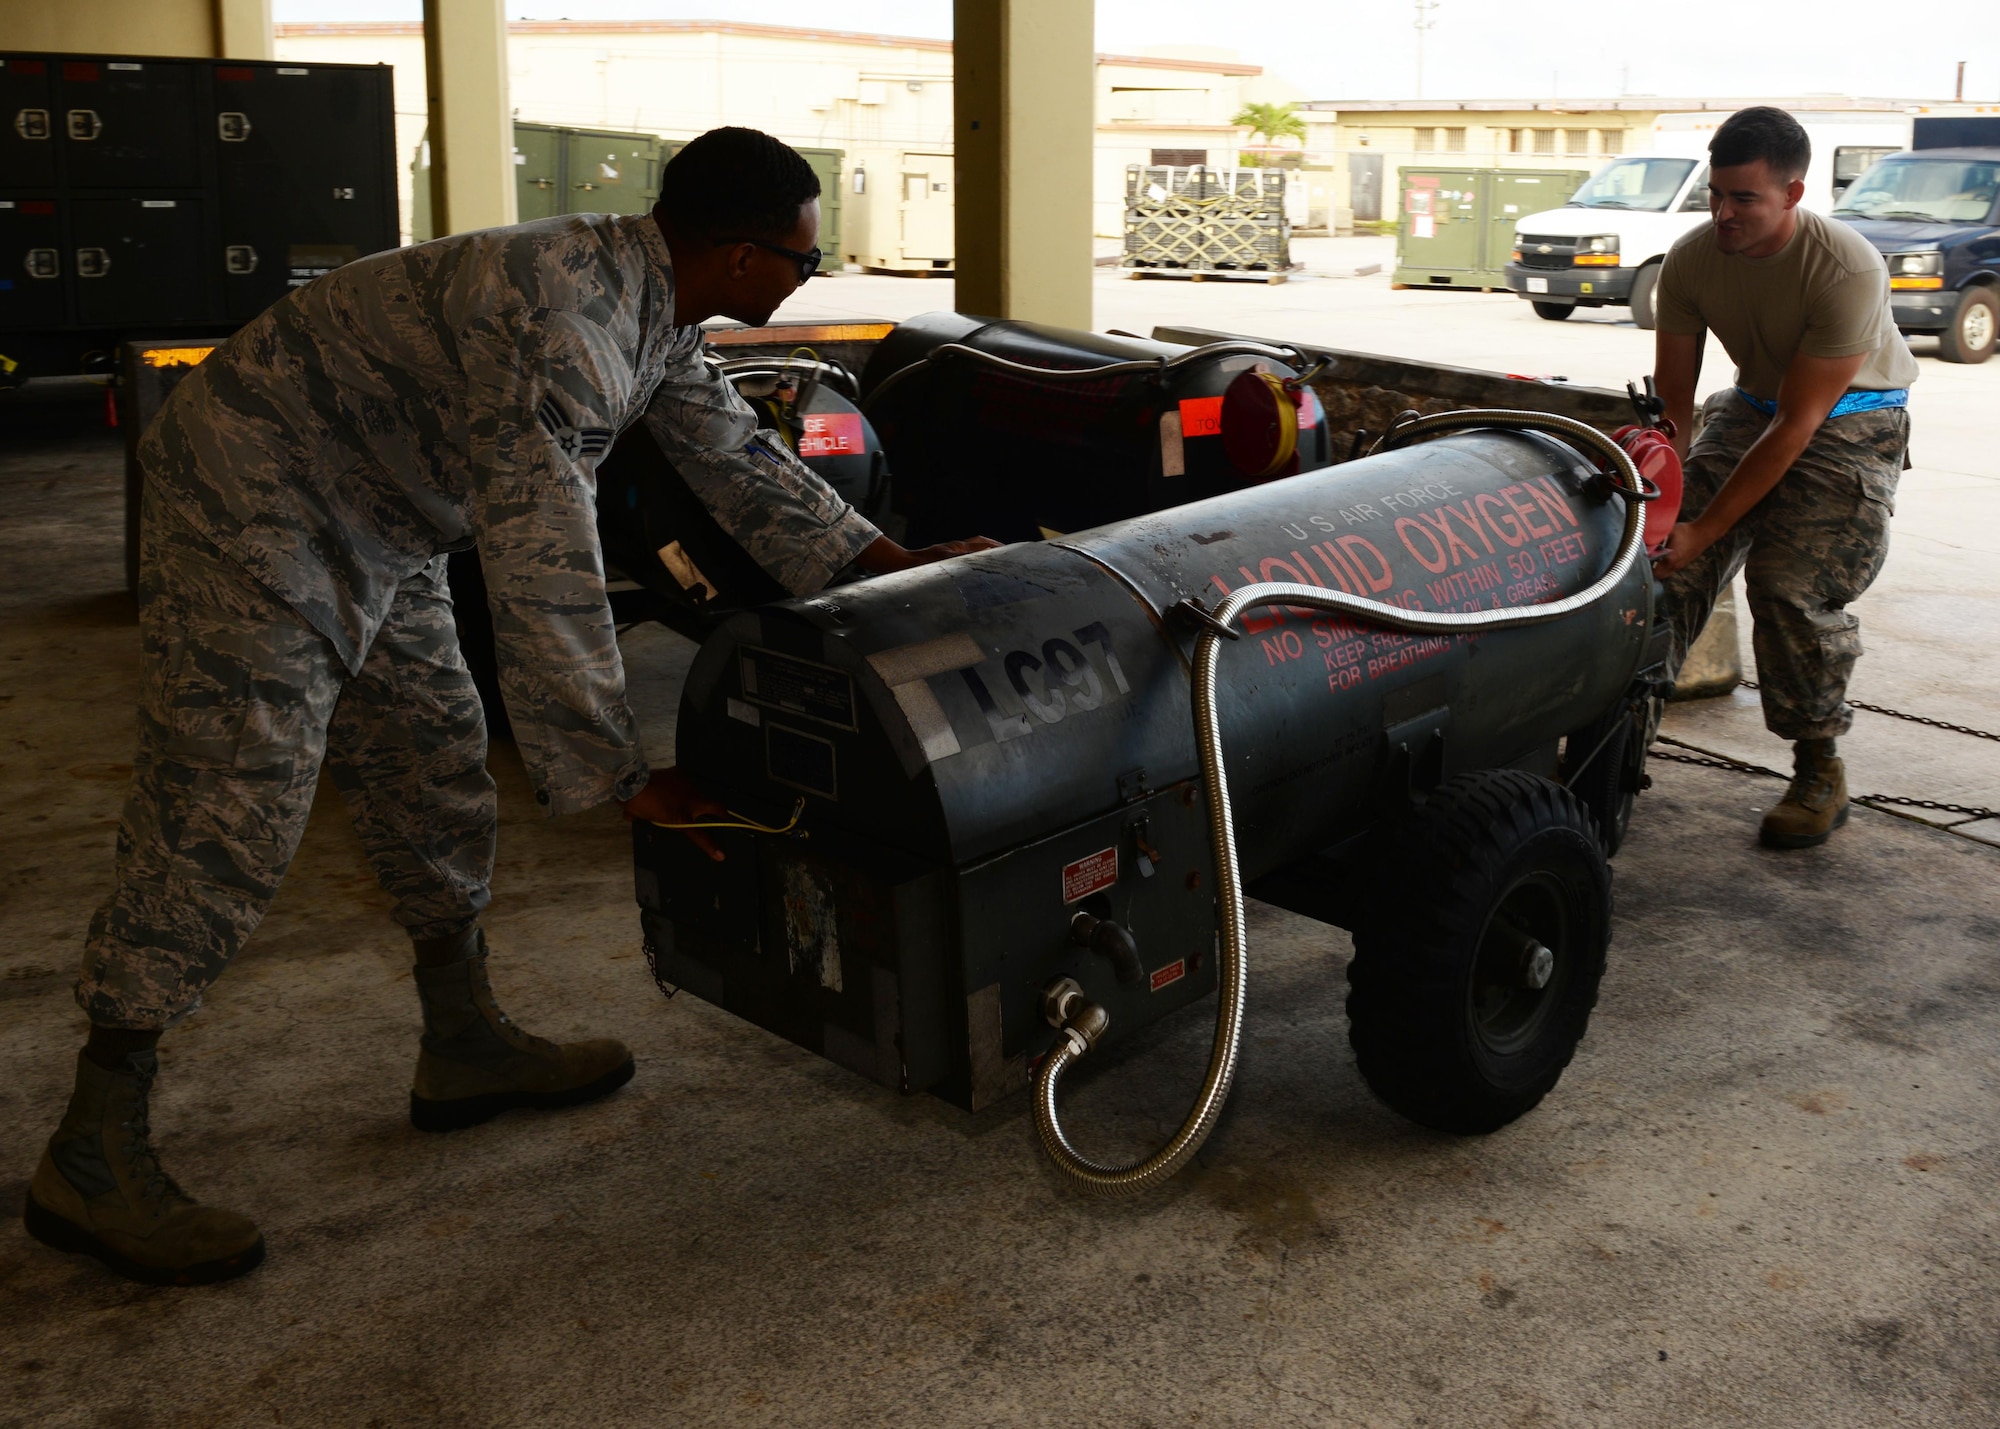 Senior Airmen Ferral Ceaser, left, and Kevin Hakala, both 36th Maintenance Squadron electrical and environmental technicians, push a liquid oxygen cart for transportation, Dec. 1, 2015, at Andersen Air Force Base, Guam. After inspecting the cart, the team takes the cart to cryogenics to be filled with liquid oxygen. (U.S. Air Force photo/Senior Airman Cierra Presentado)